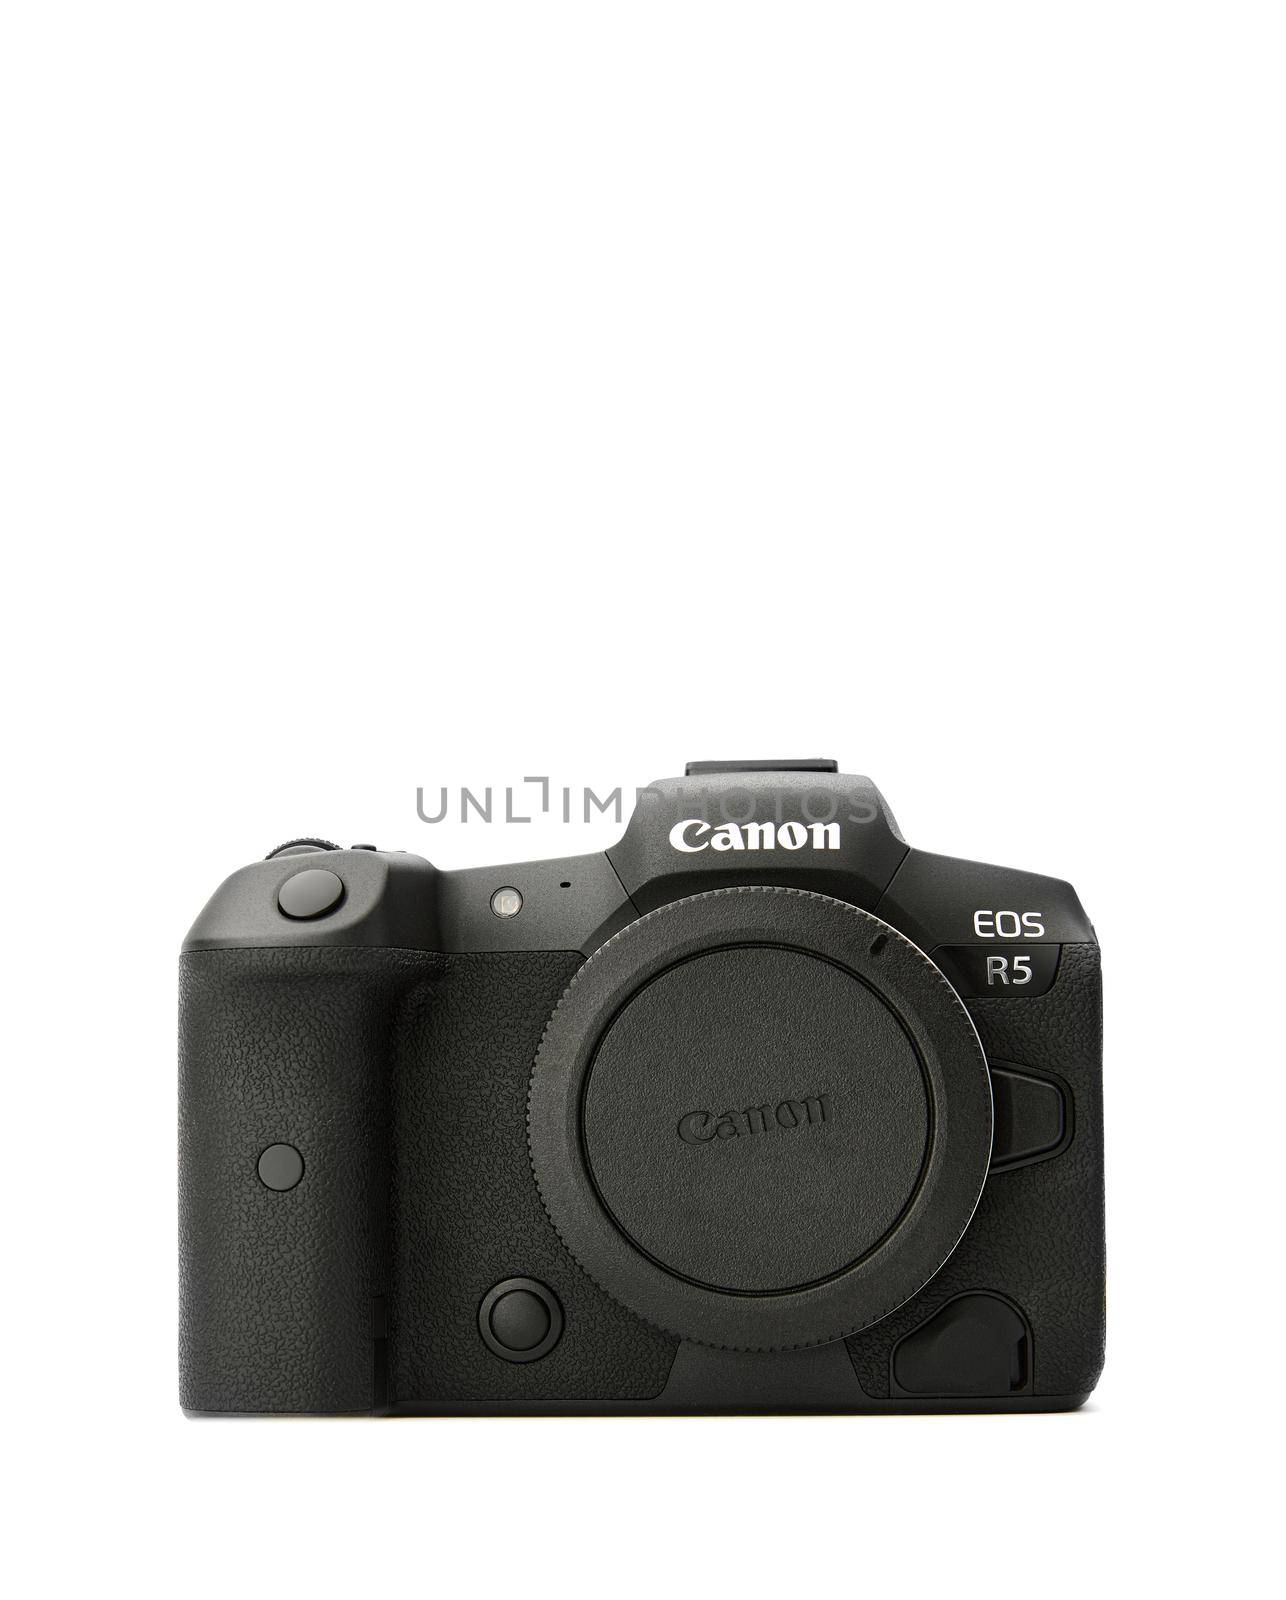 Canon EOS R5 Mirrorless Digital Camera with 8k raw video on a white background. One of the most powerful mirrorless cameras on the market. 03.04.2021, Rostov region, Russia by EvgeniyQW